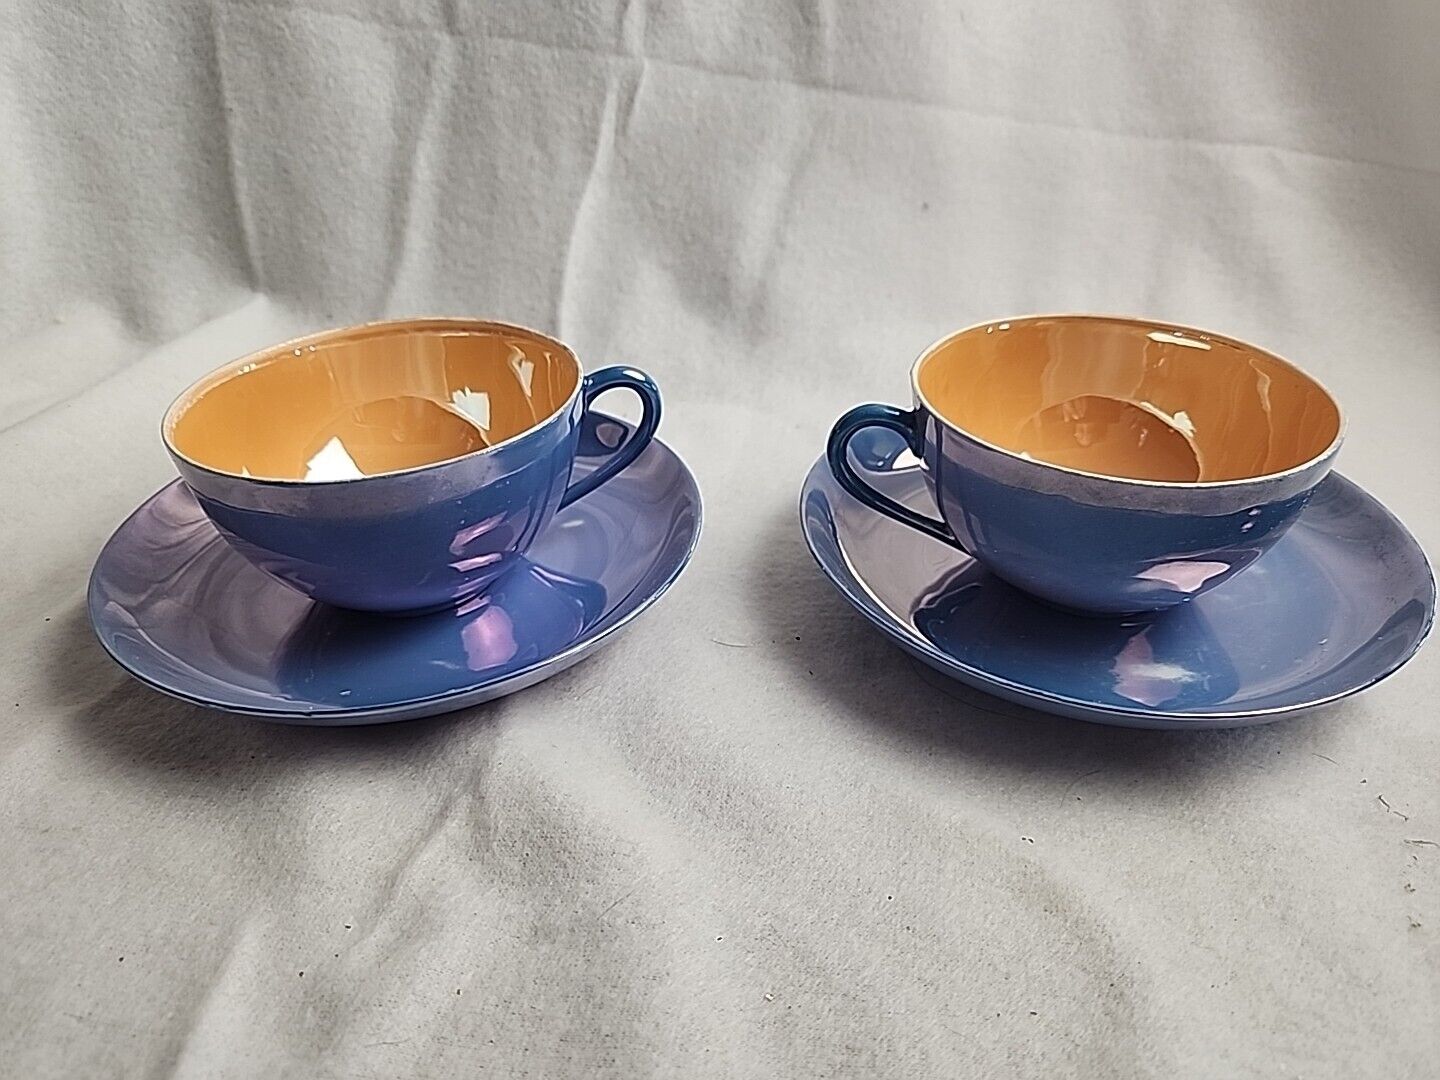 2 VTG Japanese Blue & Gold Iridescent Meito Lusterware Cups & Saucers Priority